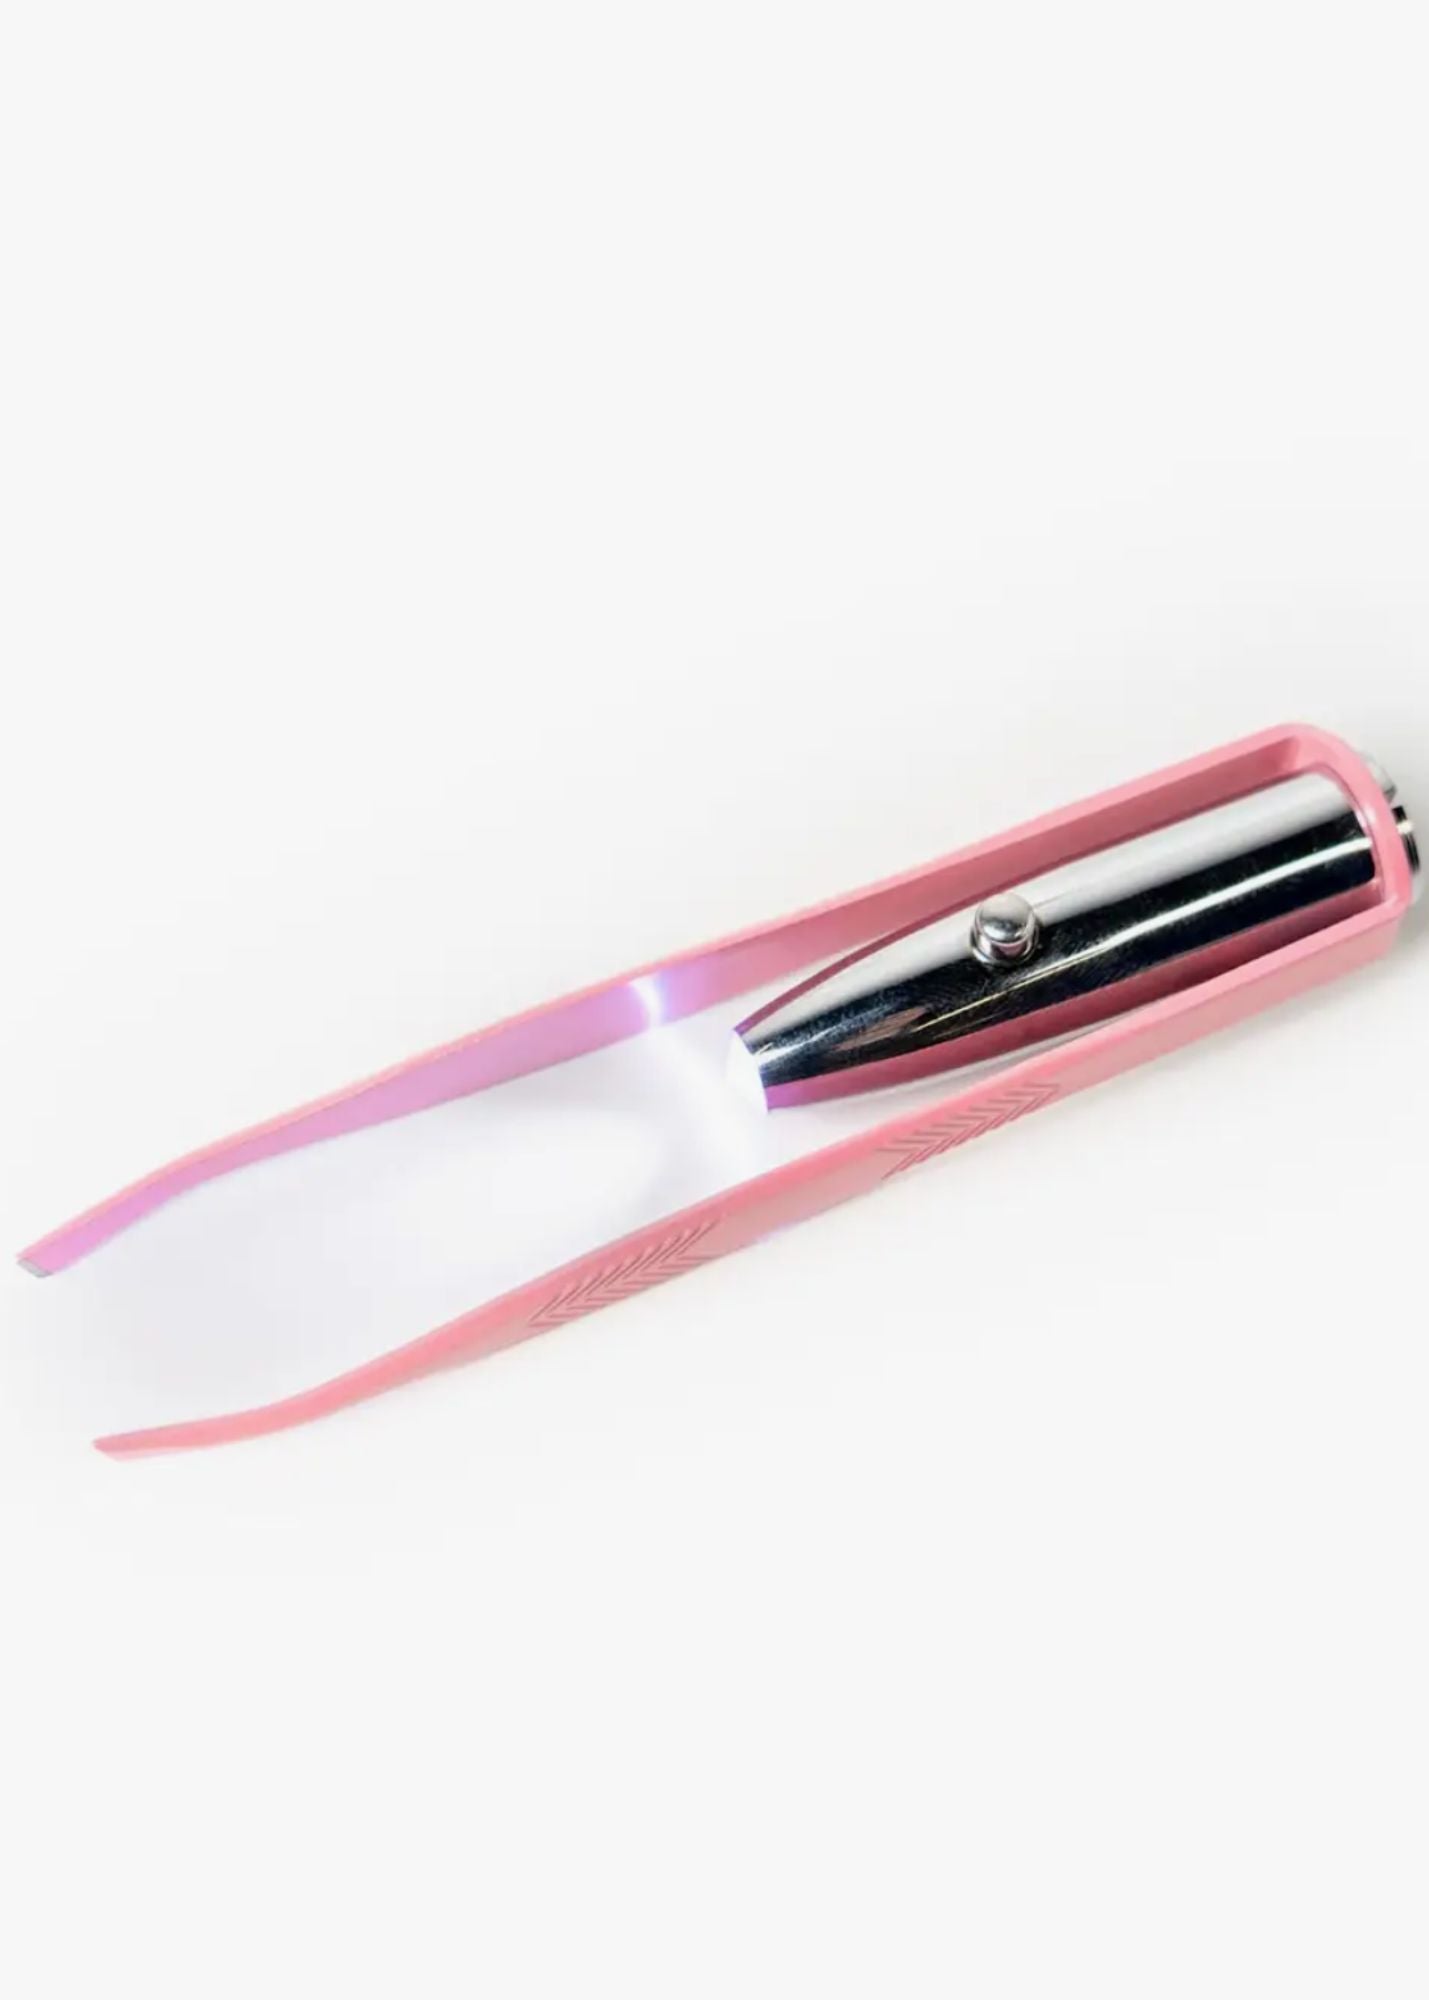 Light Up Stainless Steel Tweezers Gifts